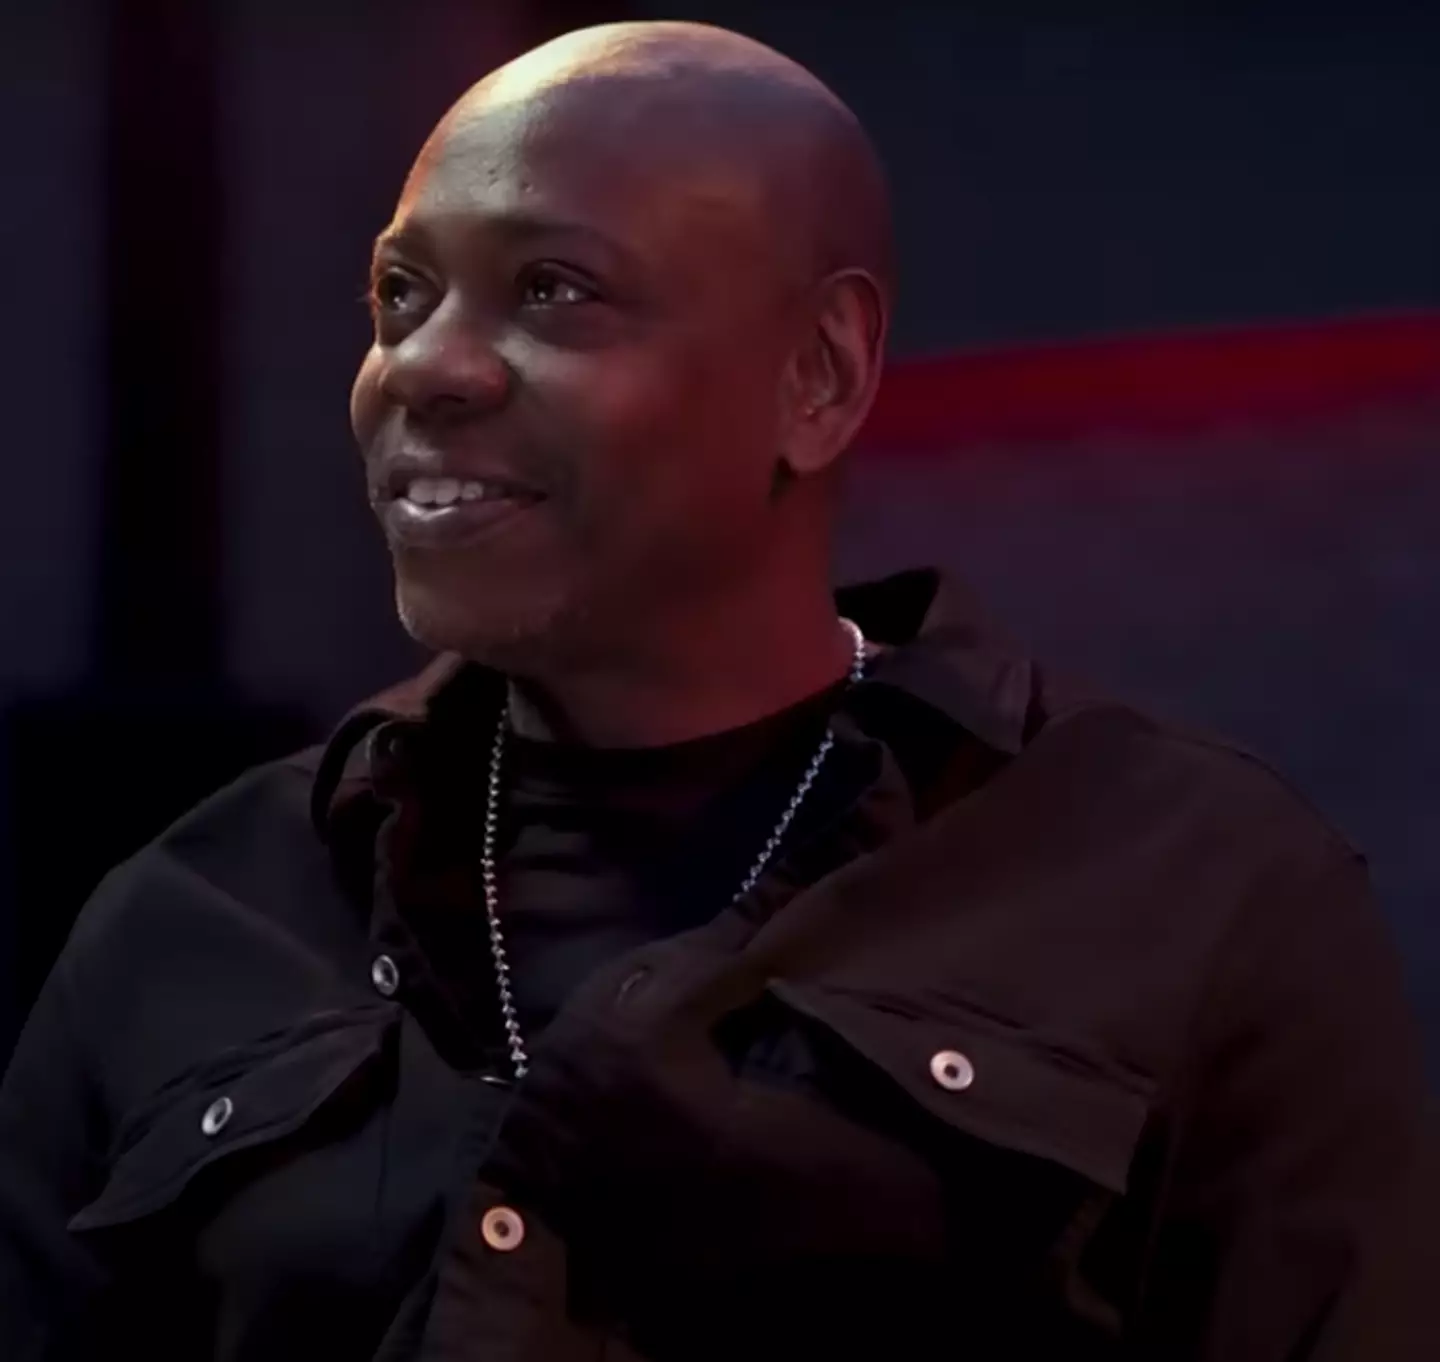 Dave Chappelle reportedly walked off stage after noticing a fan on their phone.